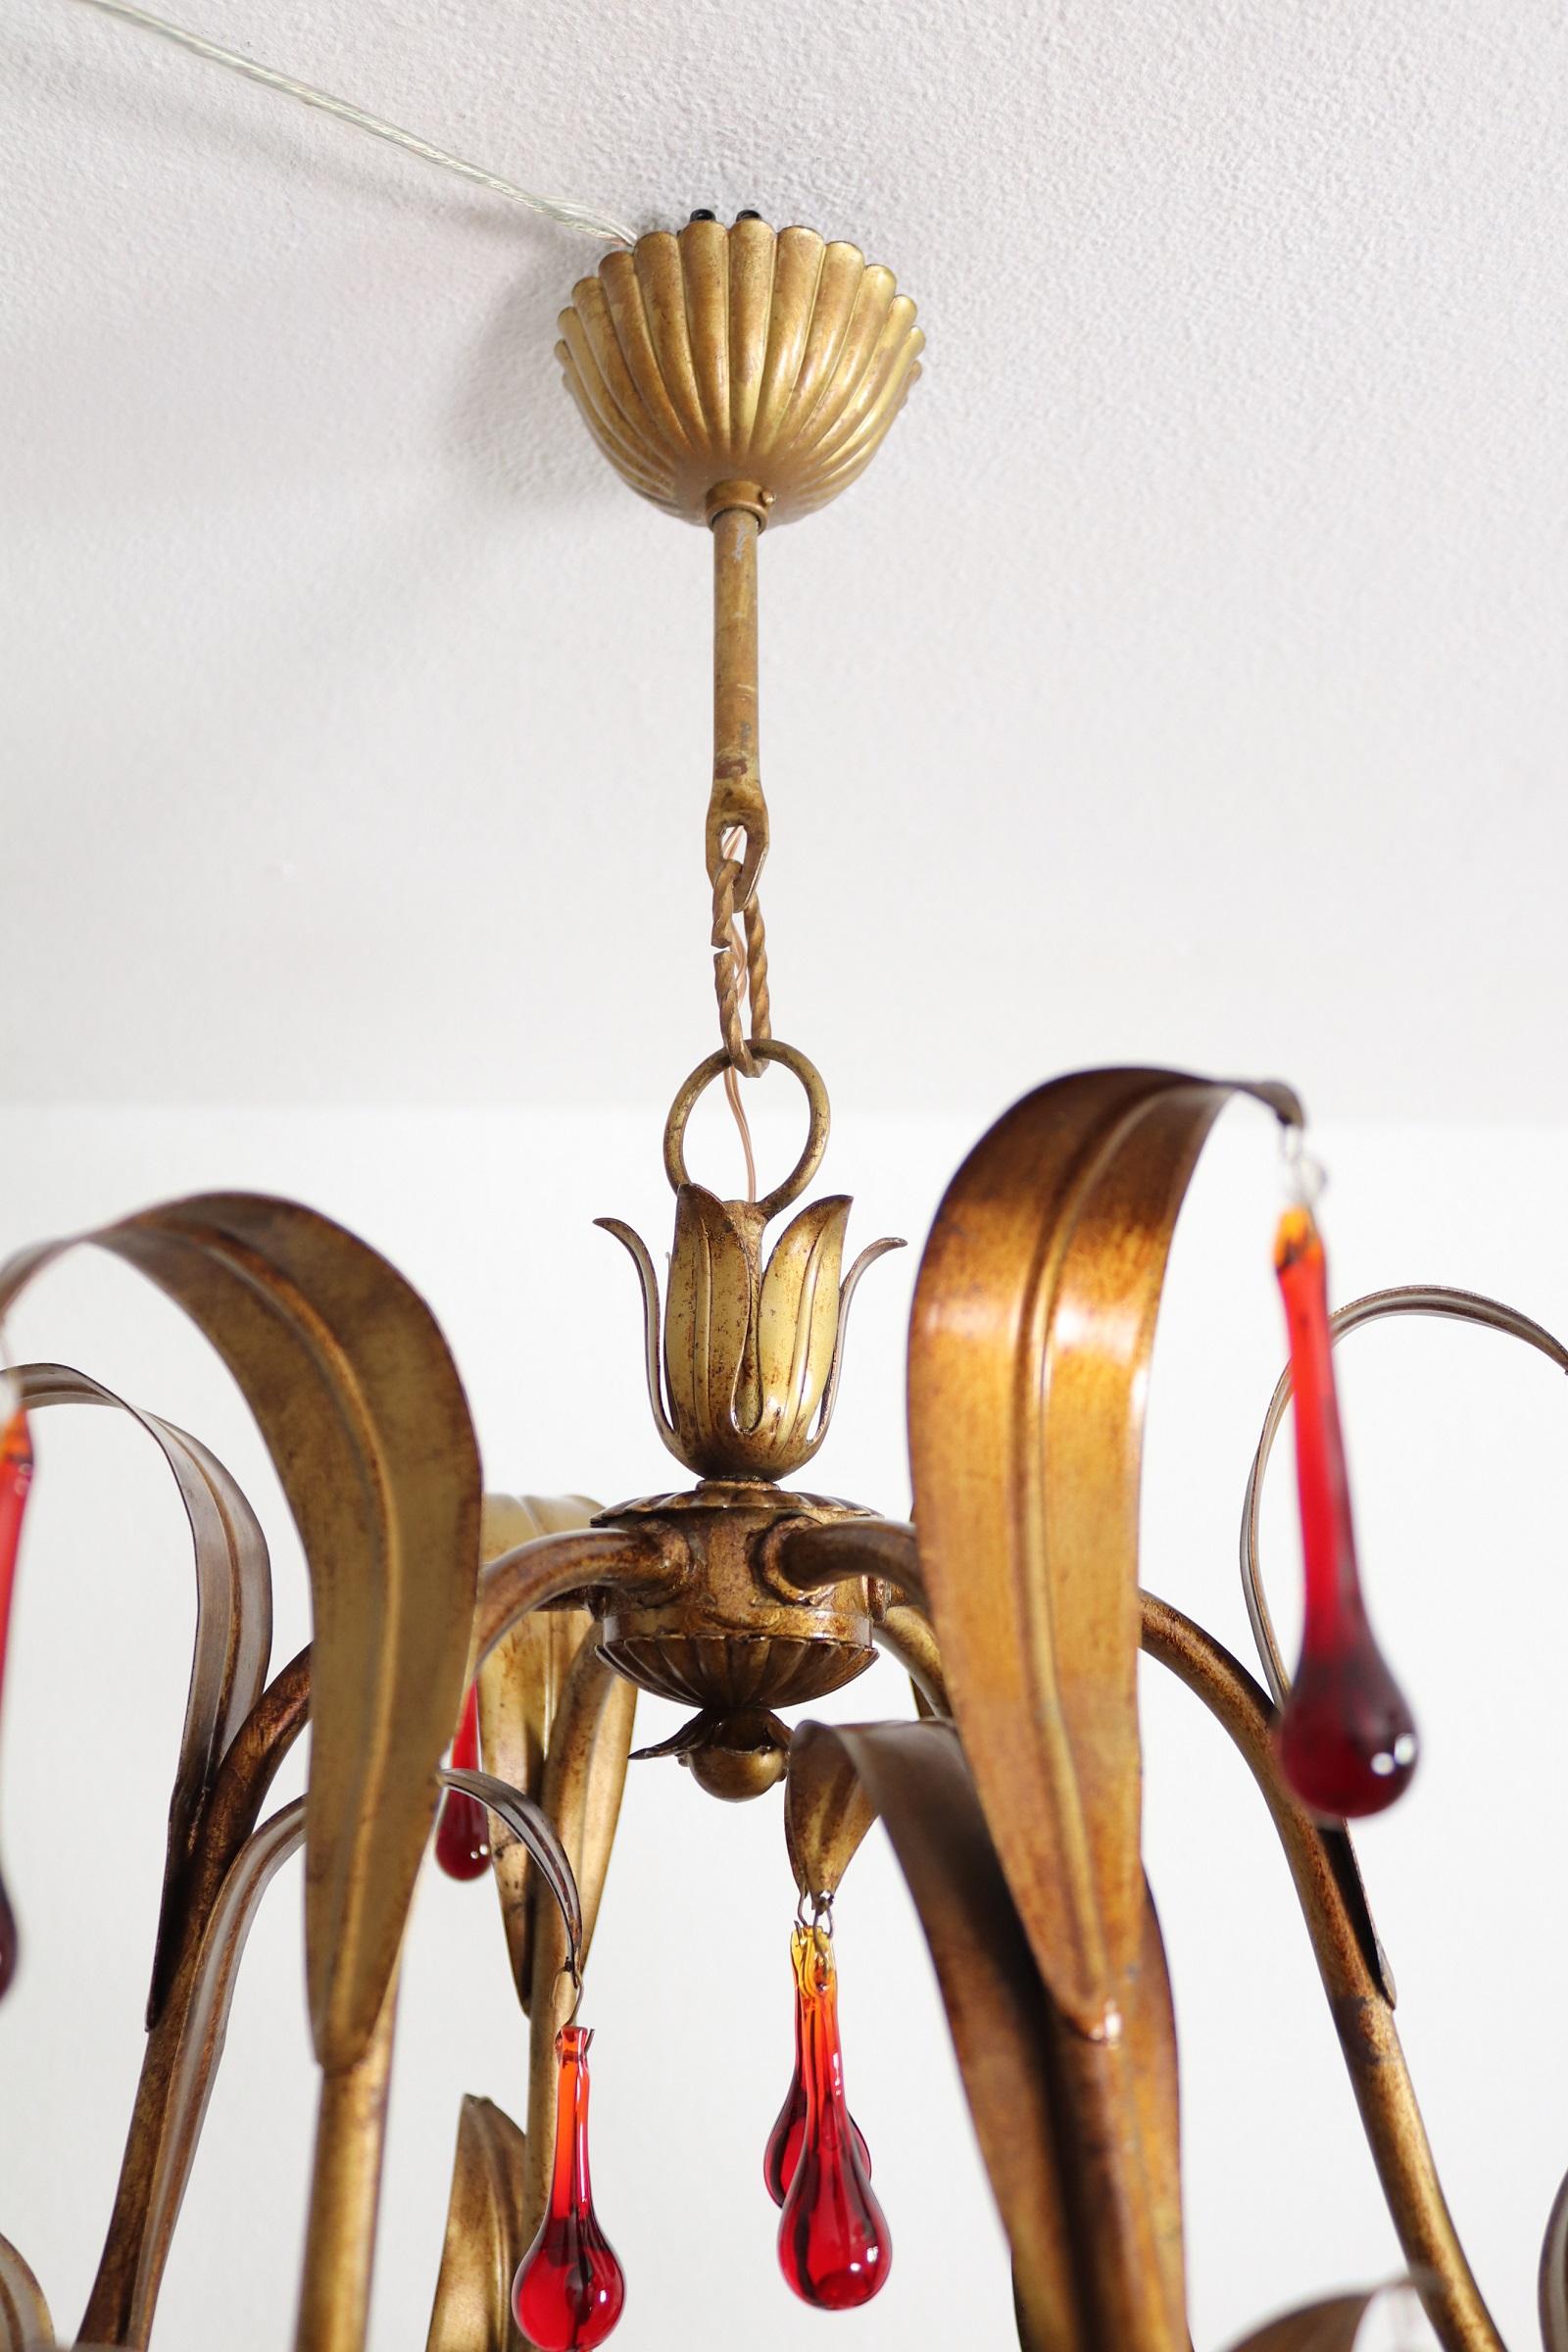 Italian Midcentury Gilt Florentine Chandelier with Red Murano Glass Drops, 1970s For Sale 7